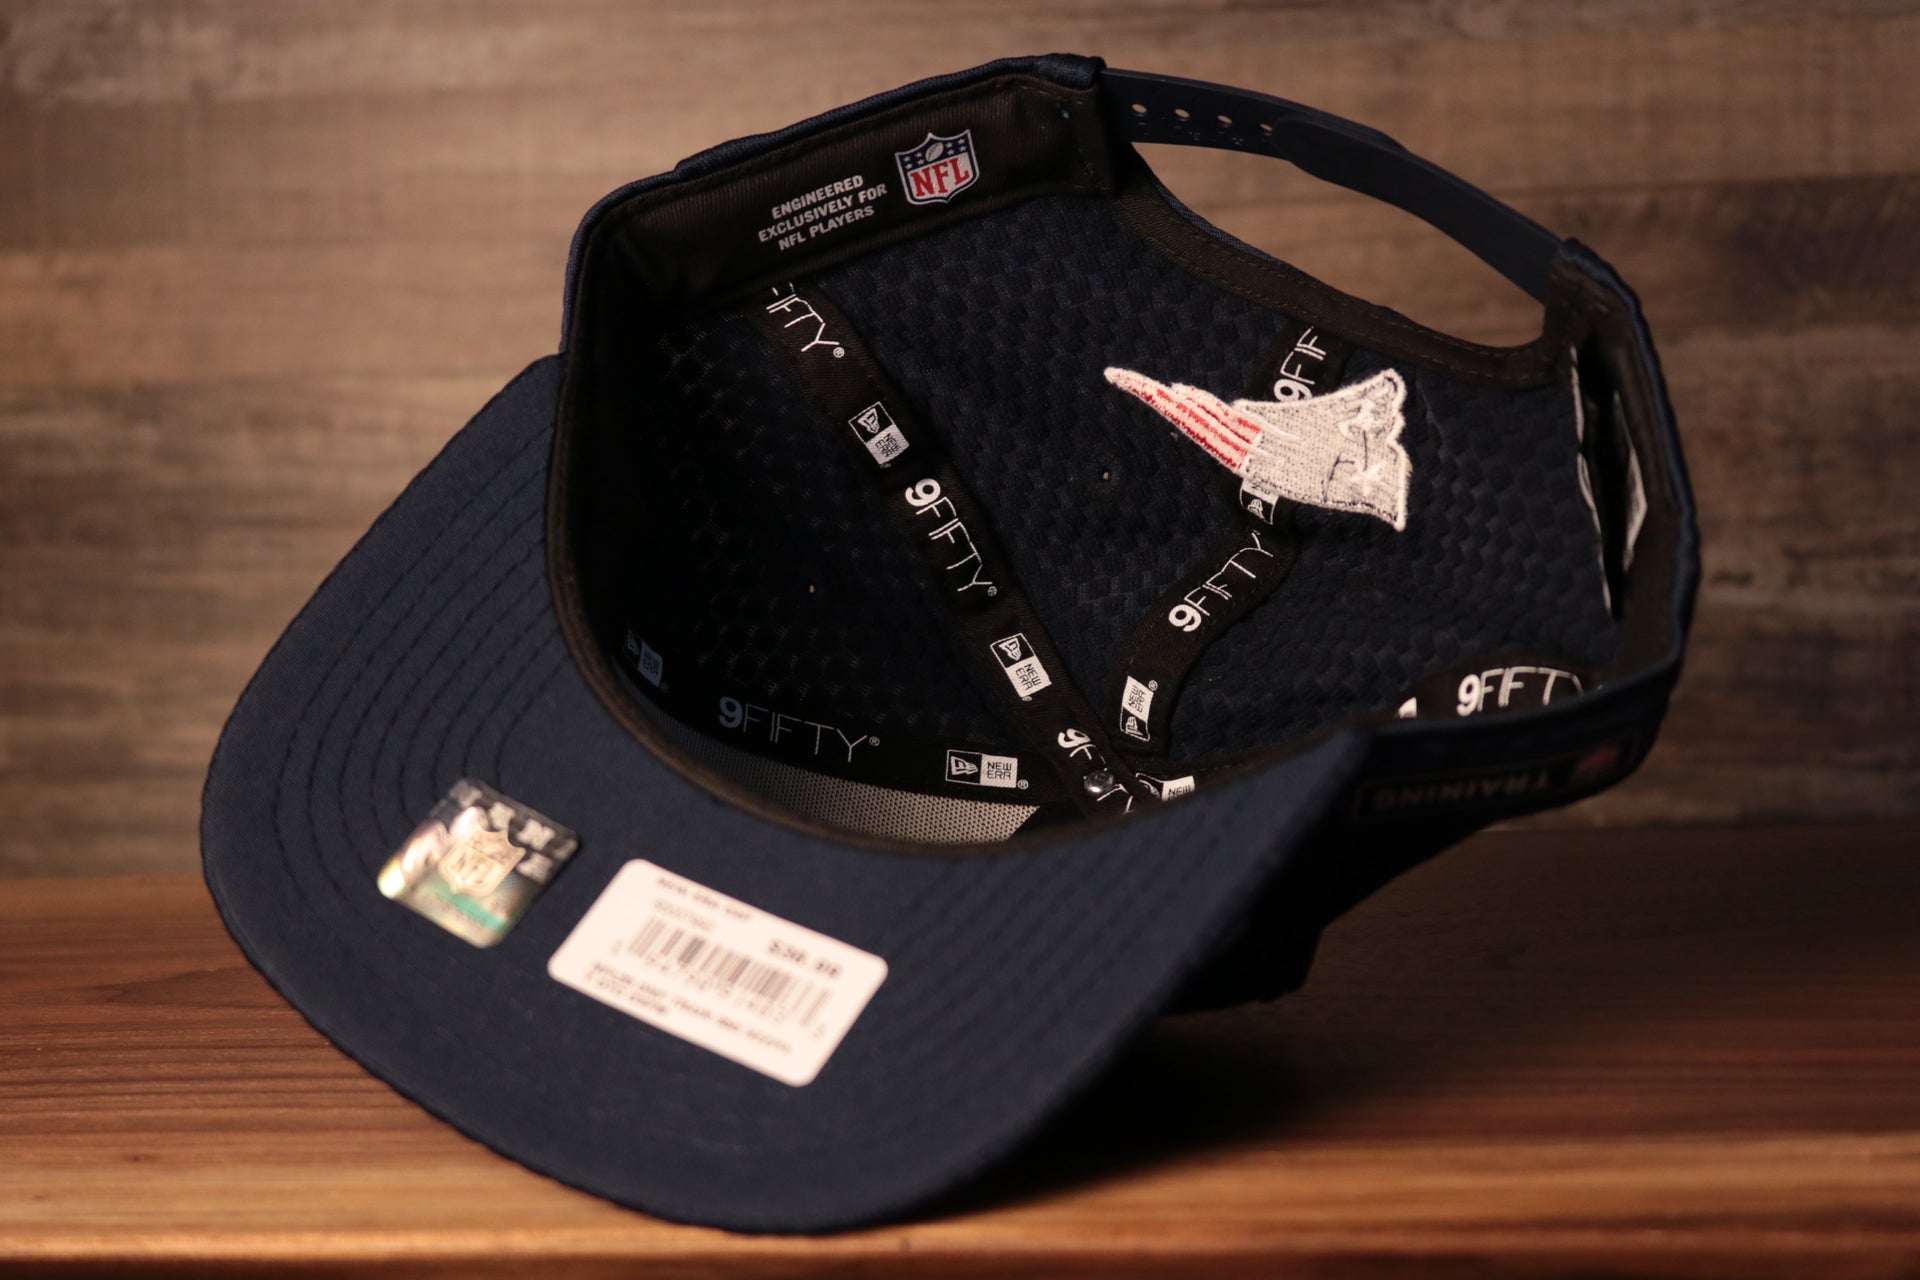 The underside is very stretchy and breathable Patriots 2020 Training Camp Snapback Hat | New England Patriots 2020 On-Field Navy Training Camp Snap Cap